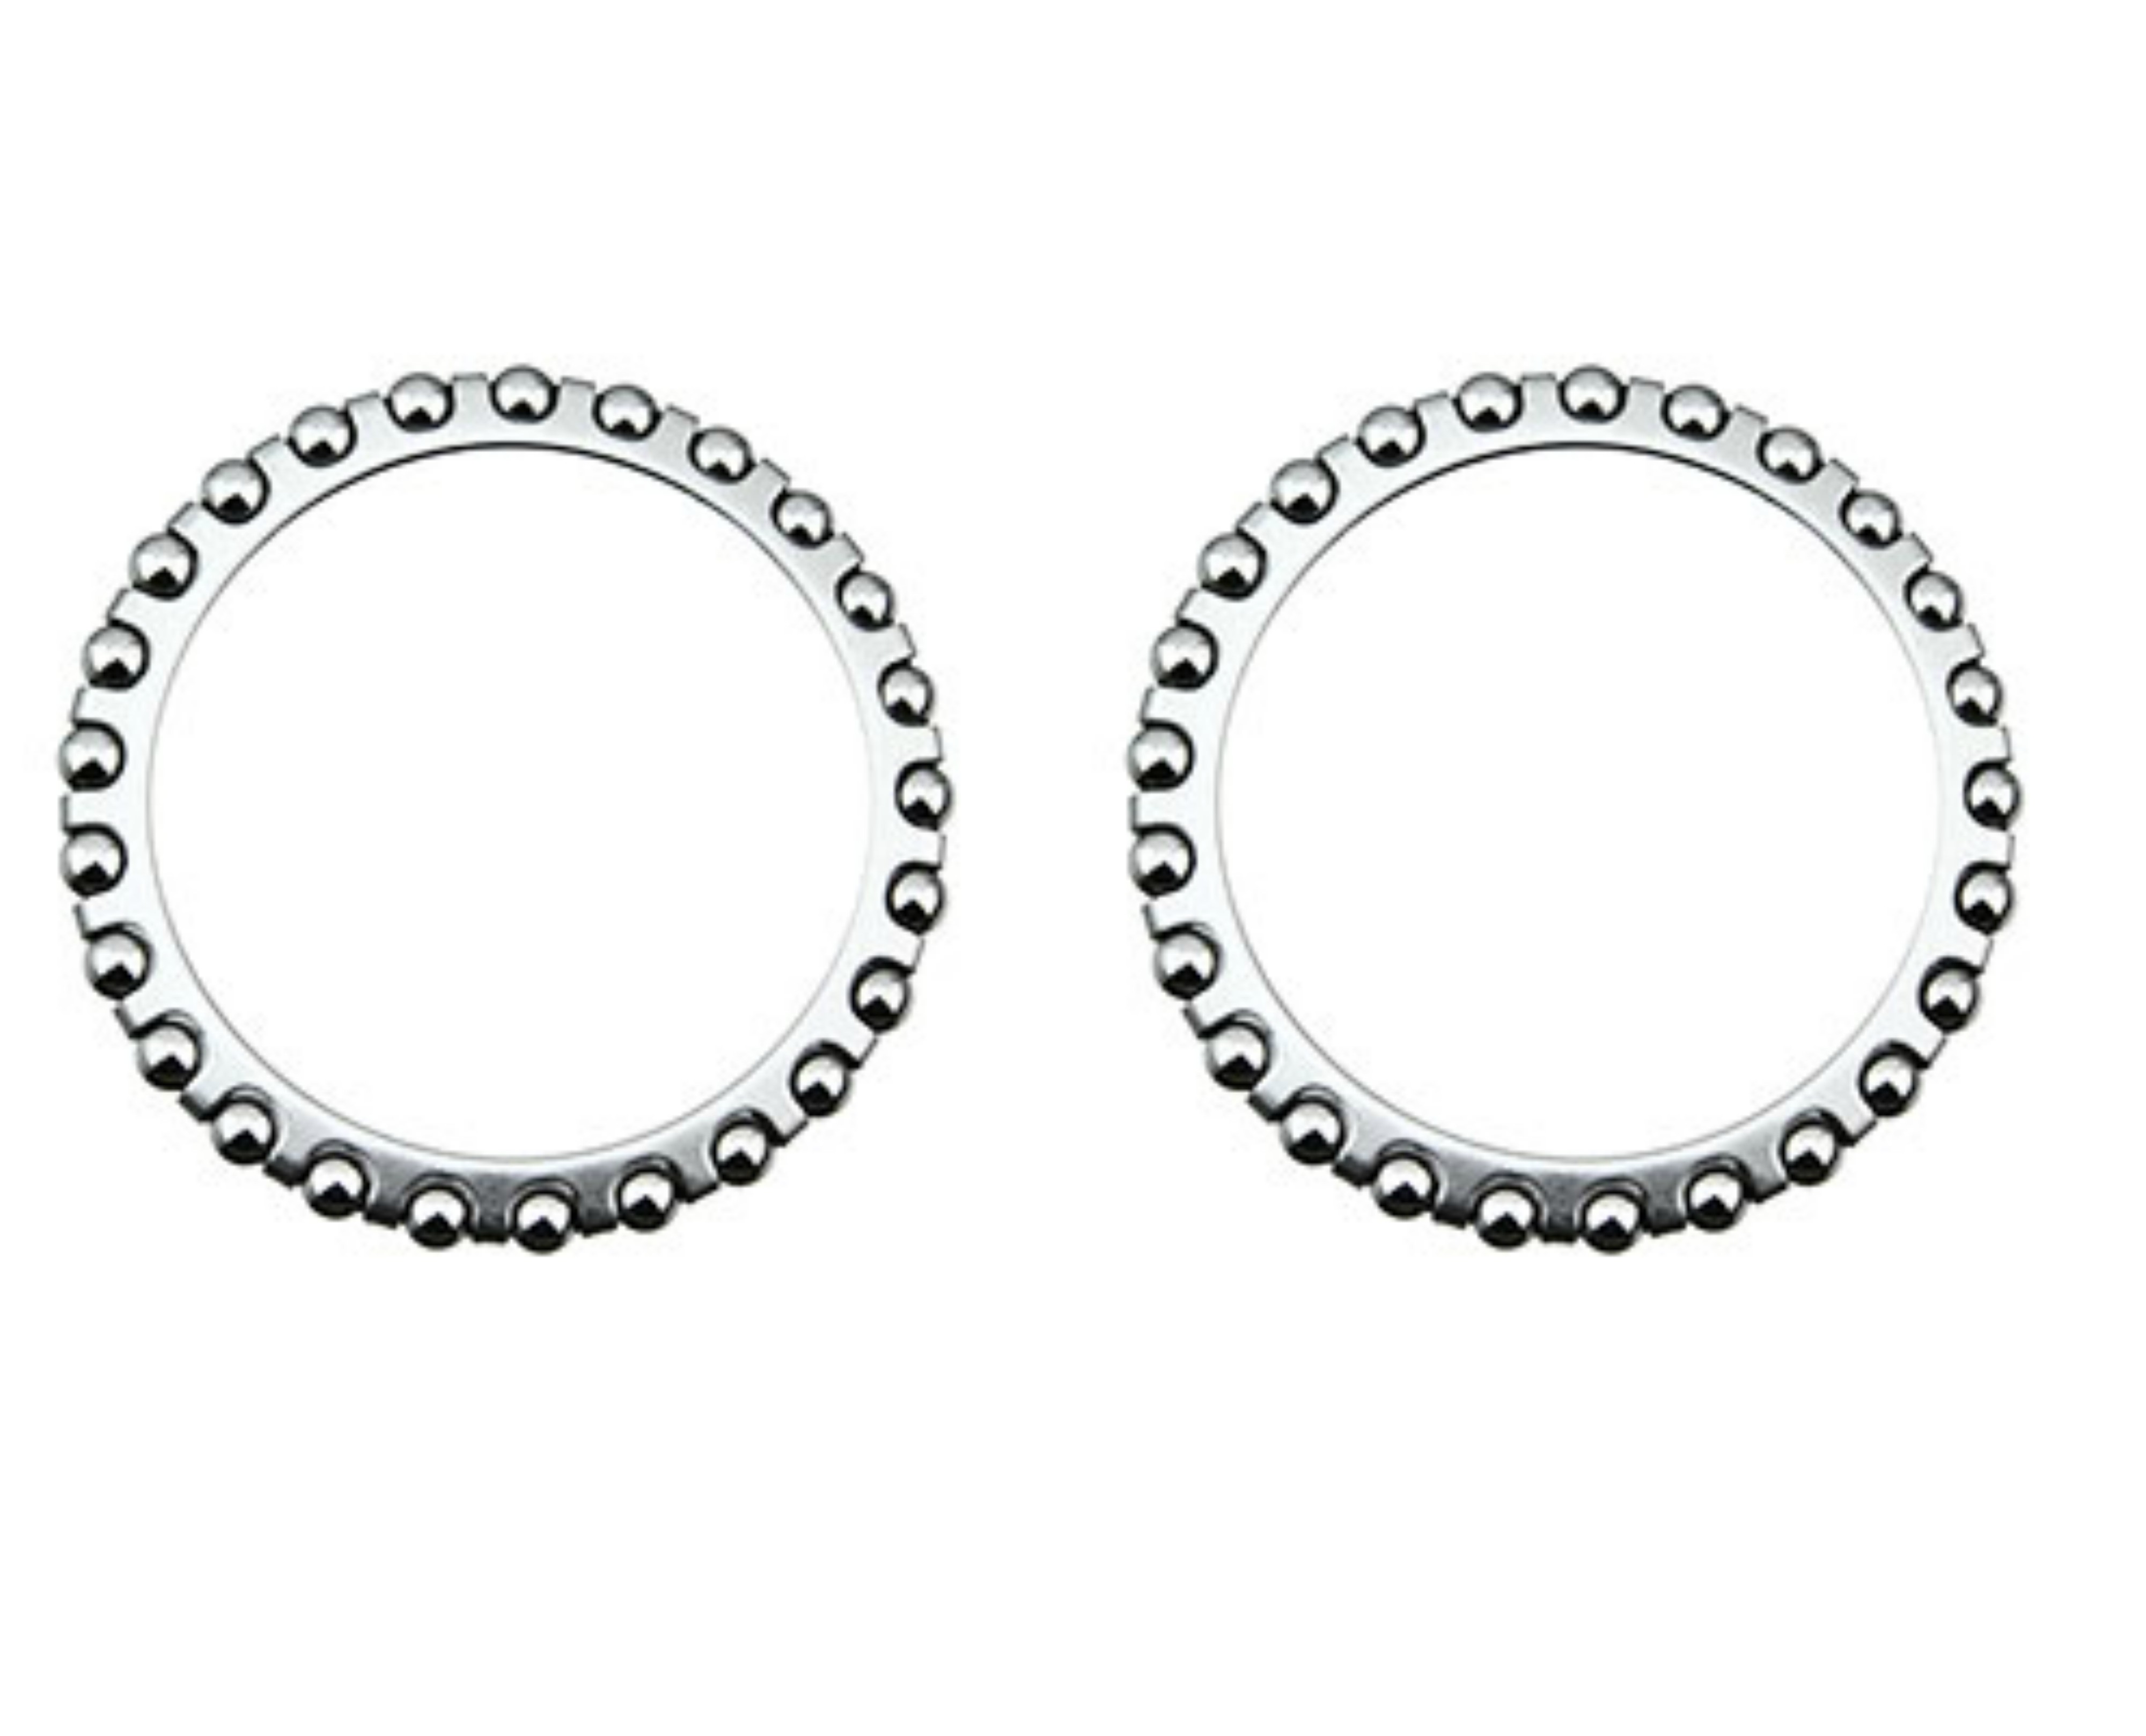 2 Headset Bearings 1/8 X 25 balls. Fits 1-1/8" headset. Set of bearing. Pair of bearings. for bicycle head set, bike headset, chopper bikes, stretch bicycles. - image 1 of 1